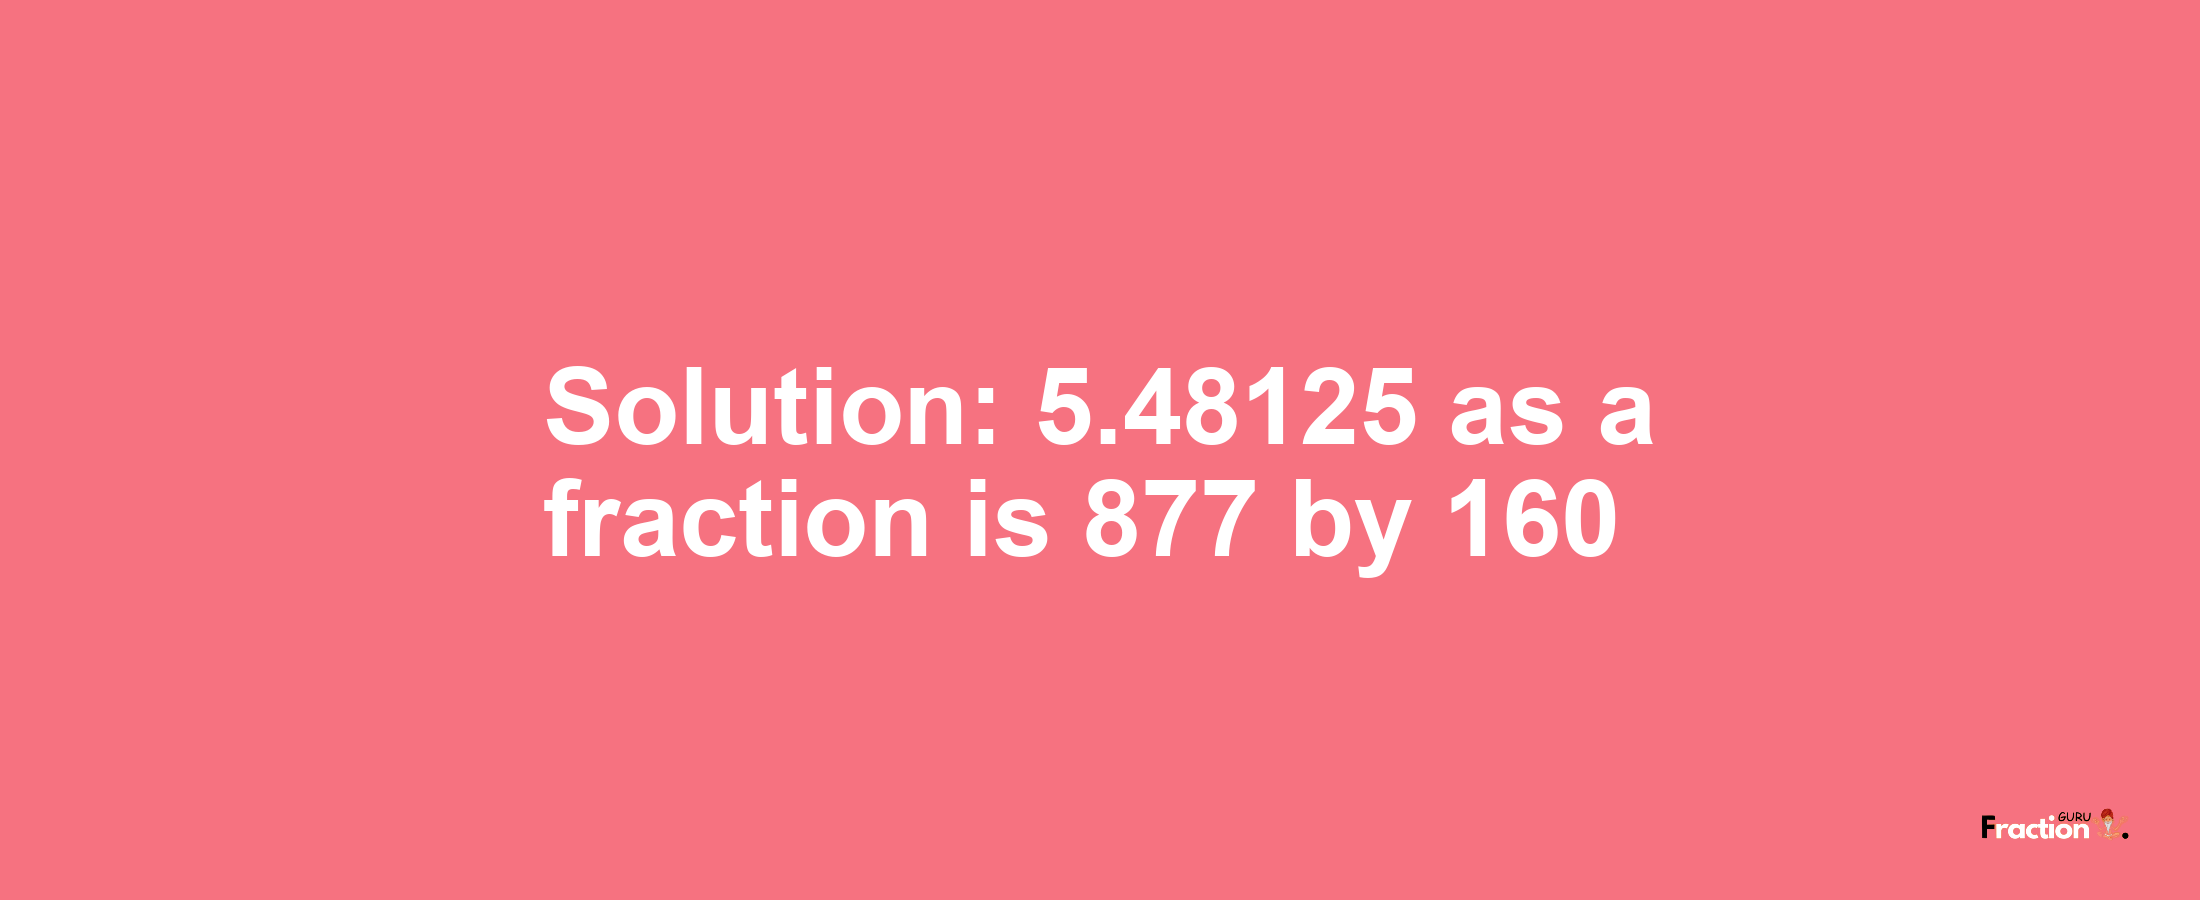 Solution:5.48125 as a fraction is 877/160